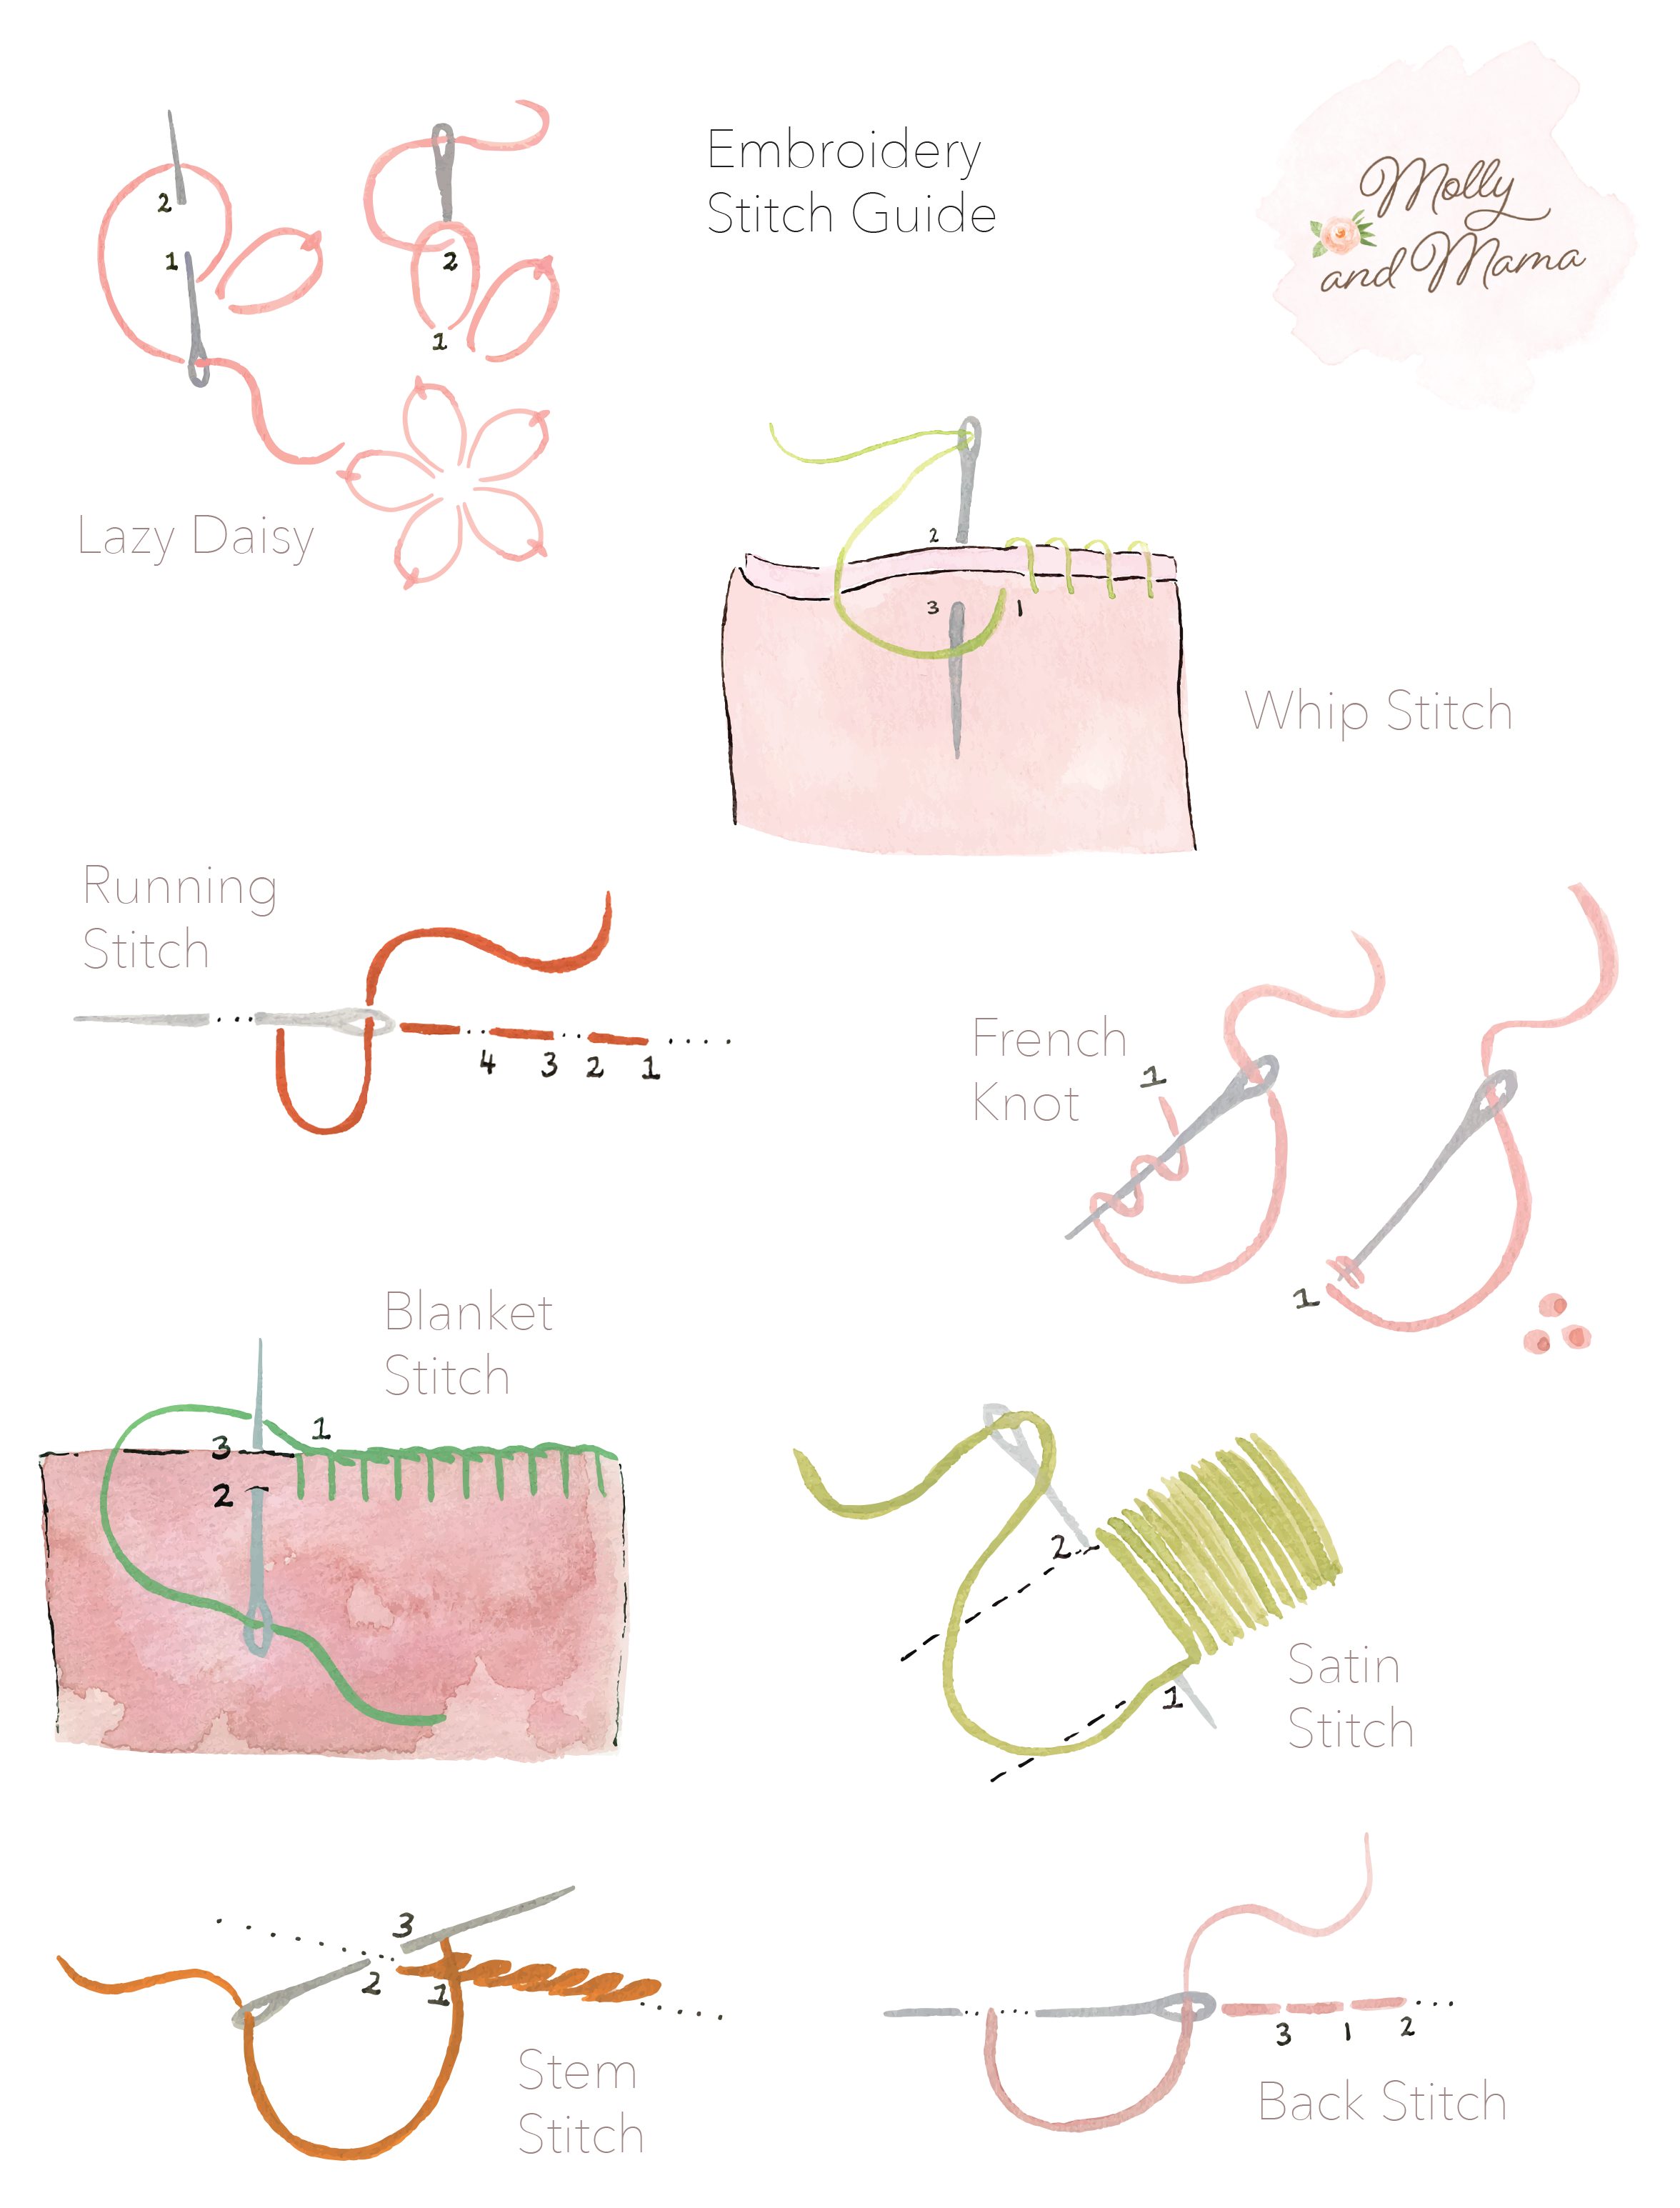 How to hand sew my stitches evenly such as stitching in a straight